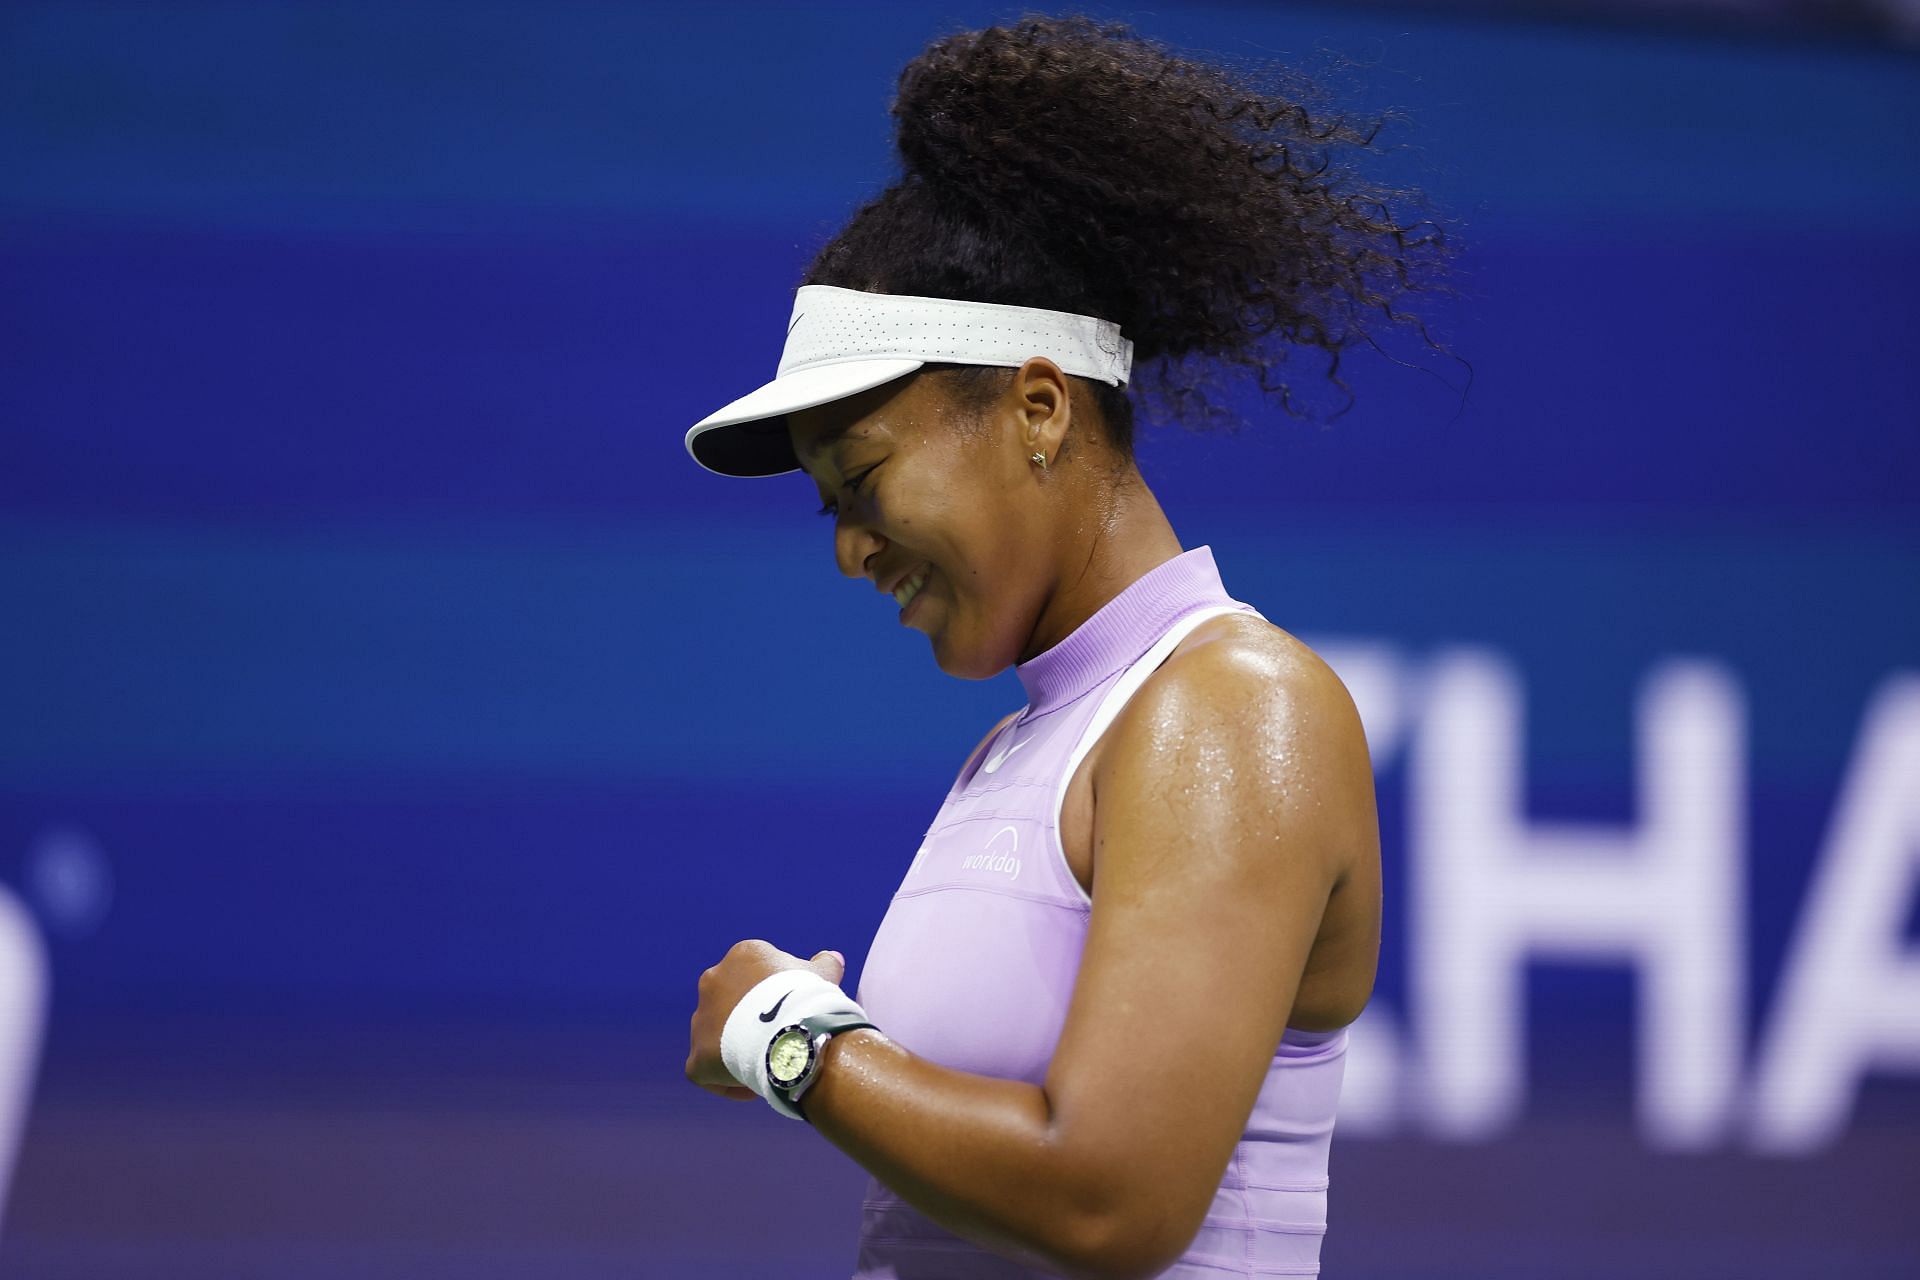 Despite the defeat, Naomi Osaka believes that she had fun on the court.